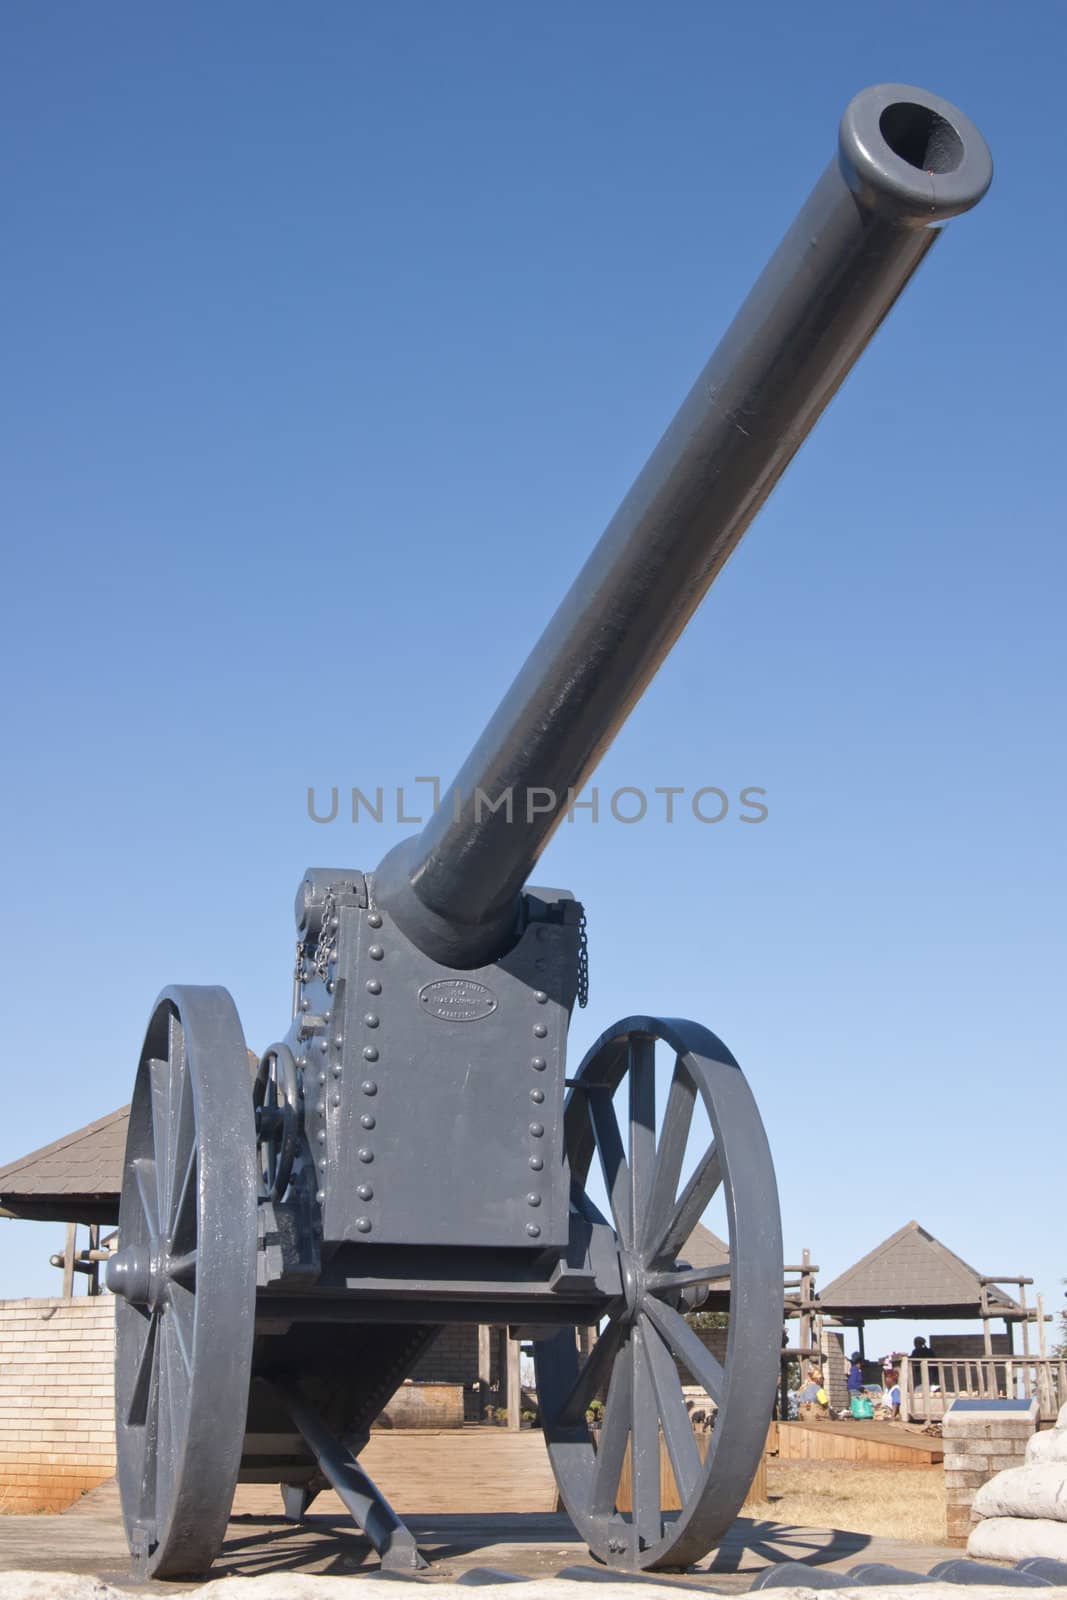 Long Tom gun from the Boer War on display at the top of a a pass in Mpumalanga, South Africa